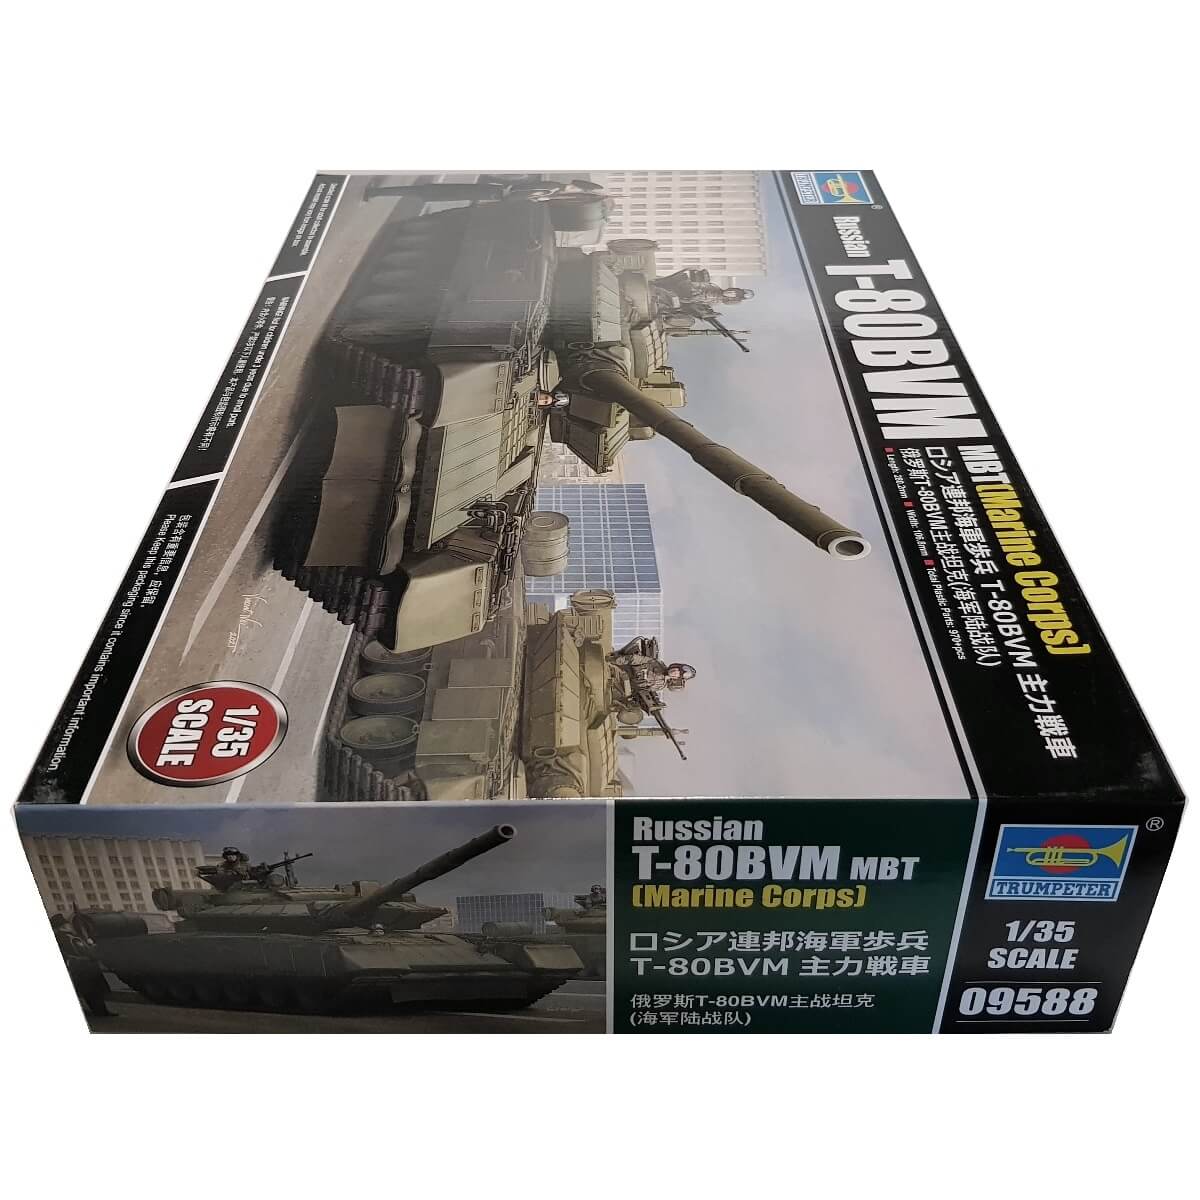 1:35 Russian T-80BVM MBT - Marine Corps - TRUMPETER